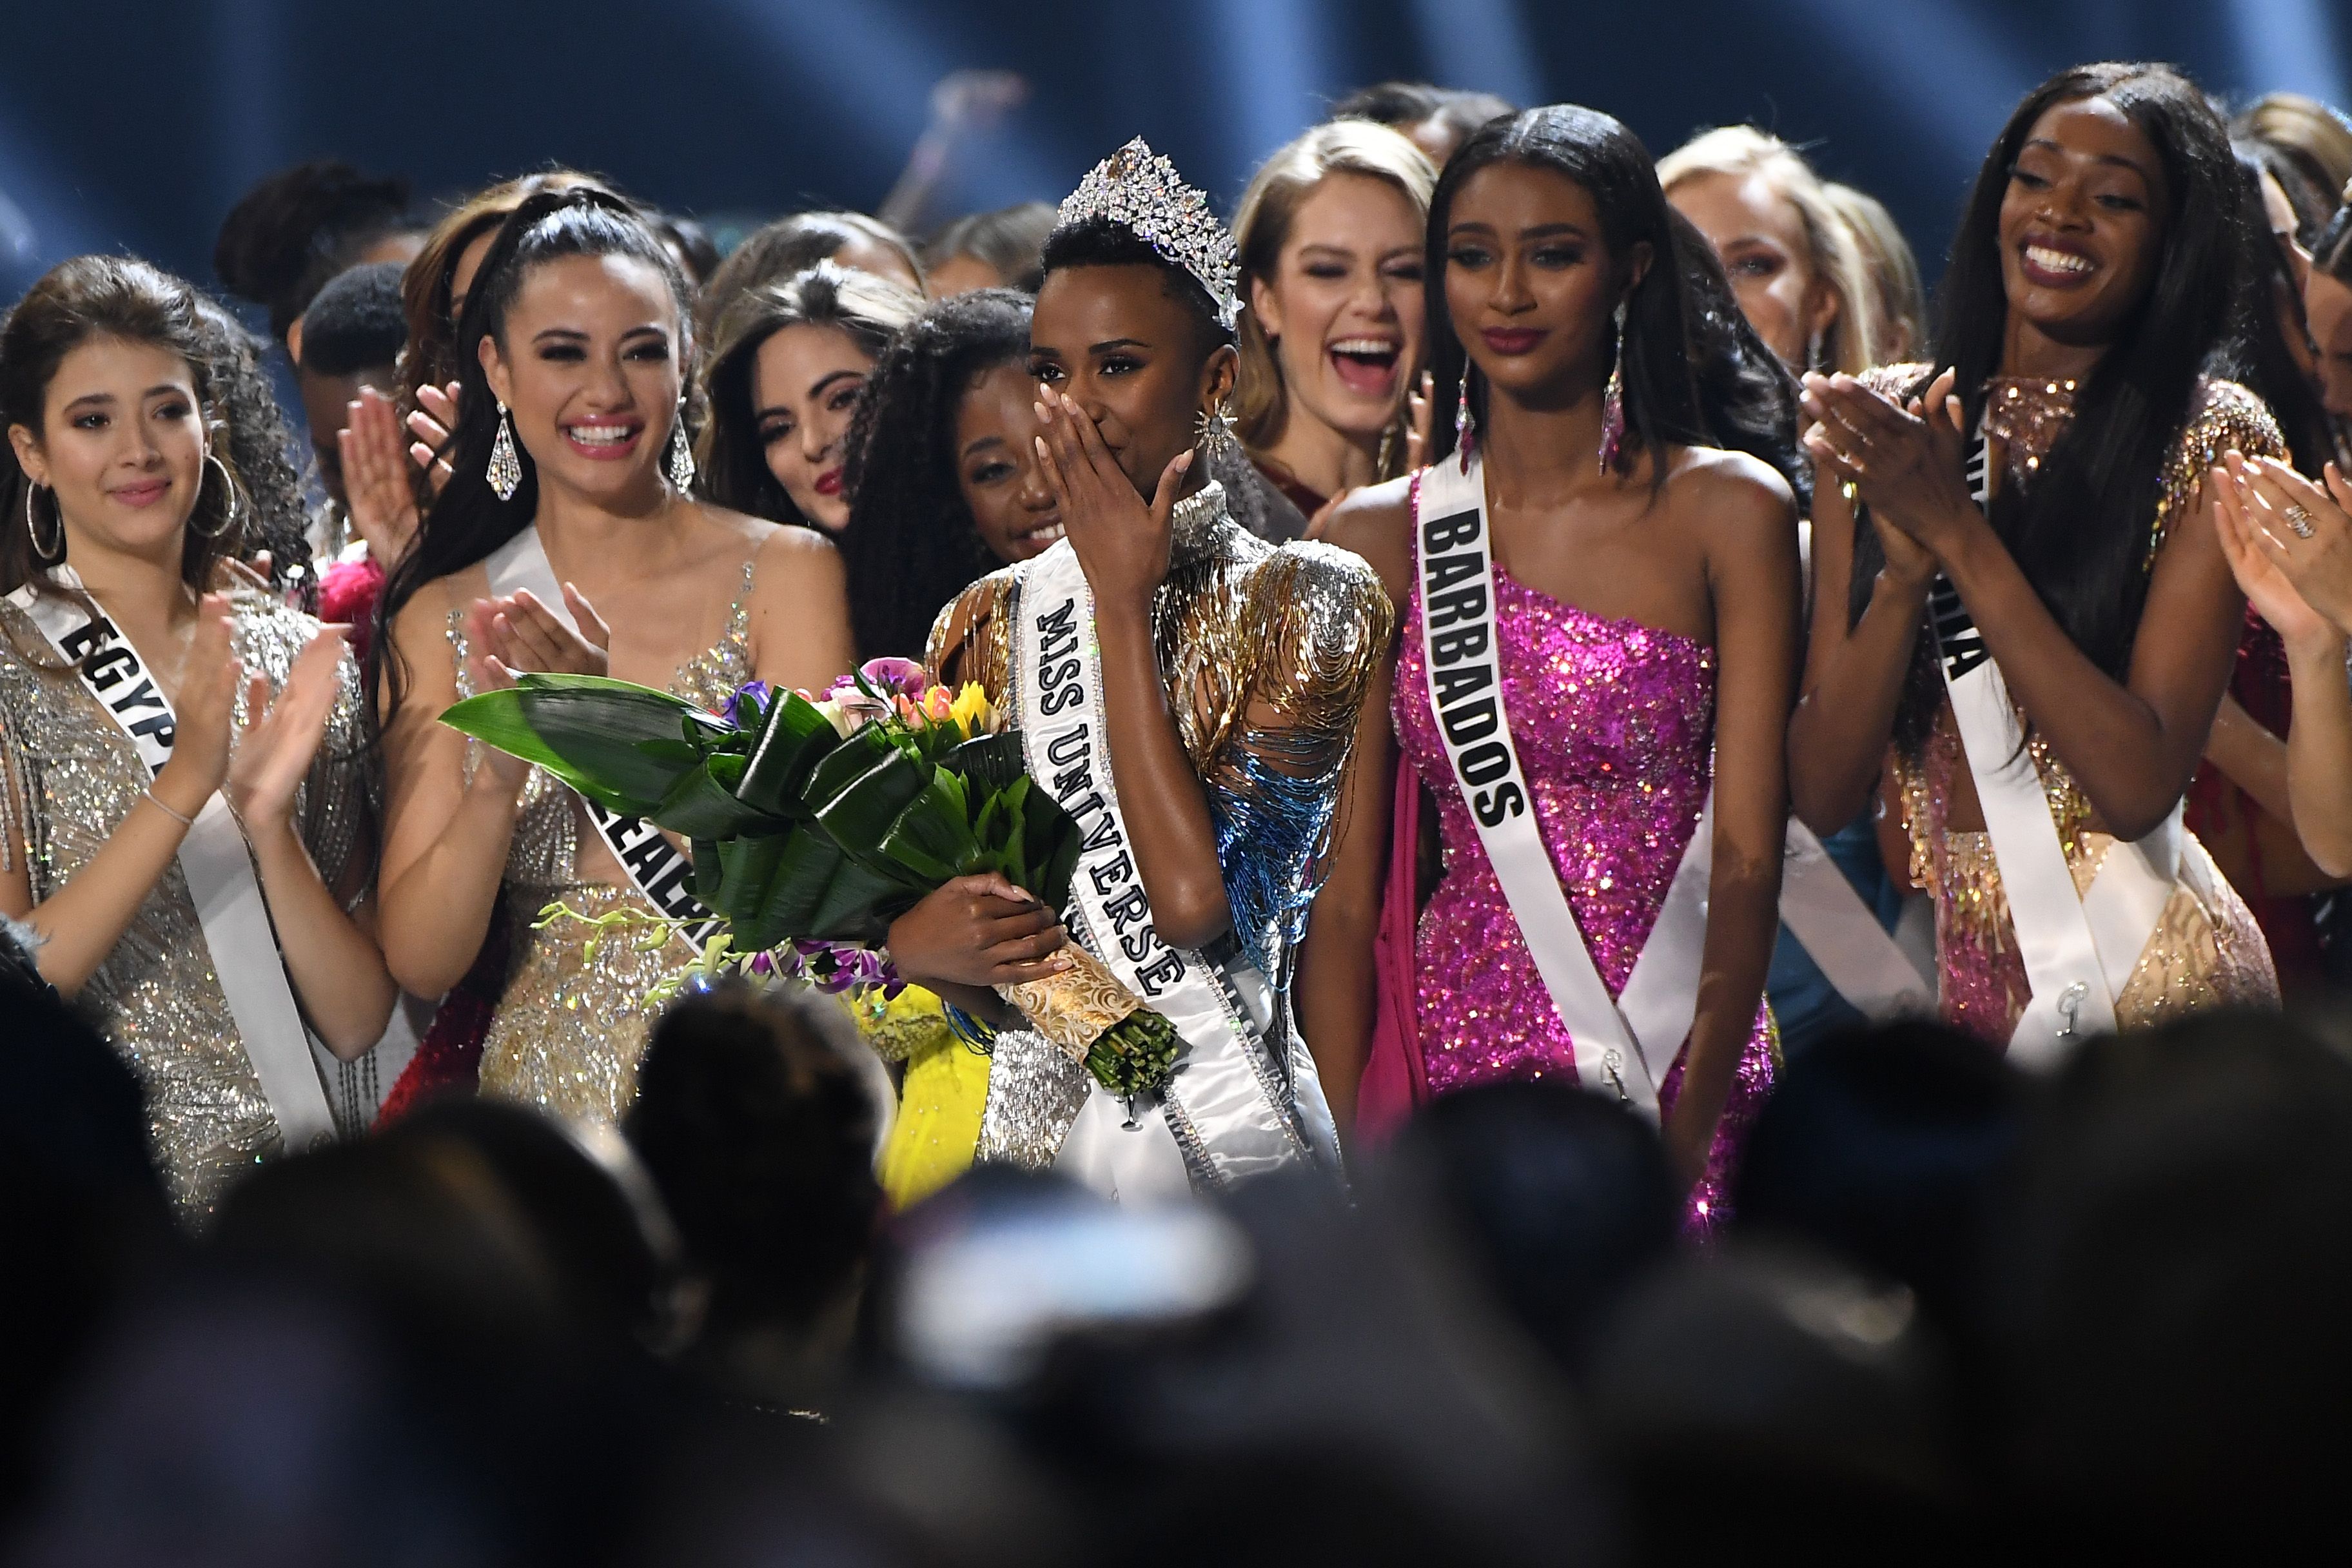 The 2019 Miss Universe Zozibini Tunzi of South Africa celebrating her victory | Source: Getty Images/GlobalImagesUkraine